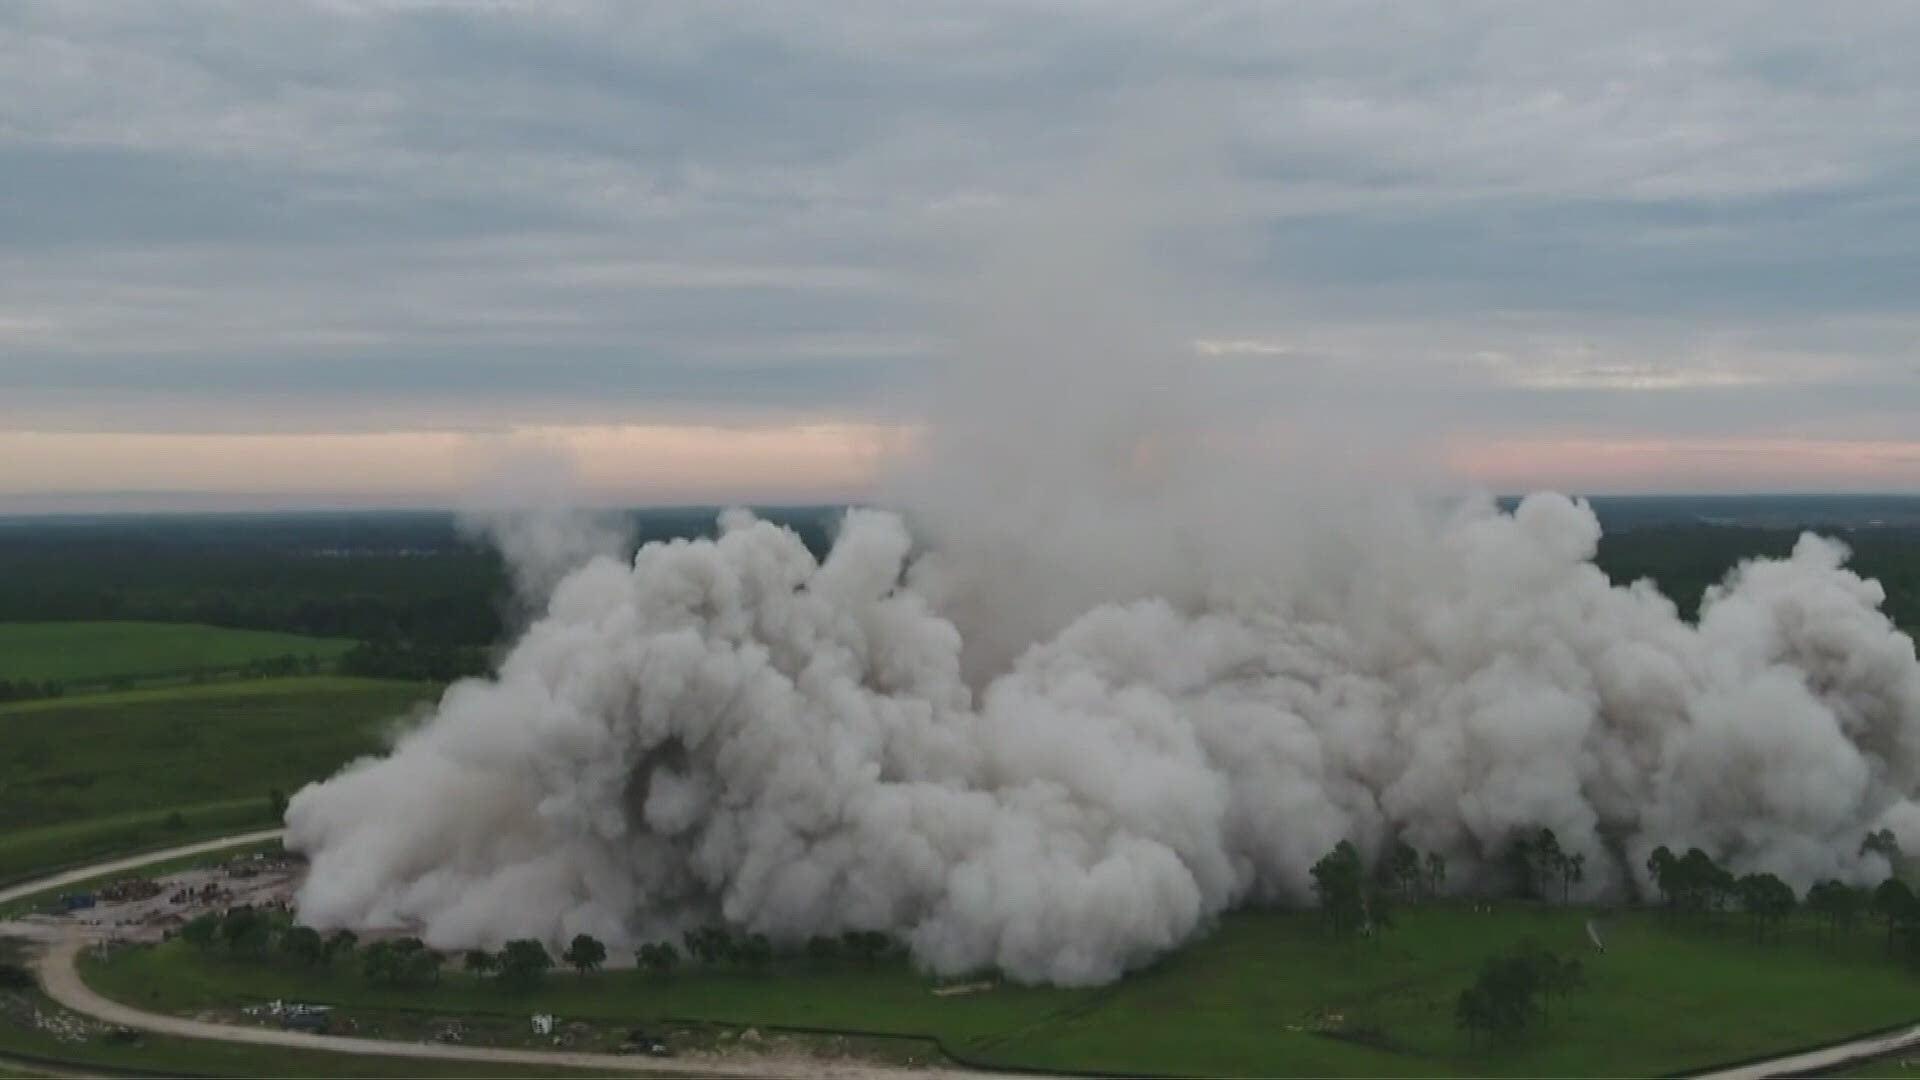 The decades-old JEA cooling towers imploded at 8 a.m. Saturday. Watch and listen to the implosion from three different angles.